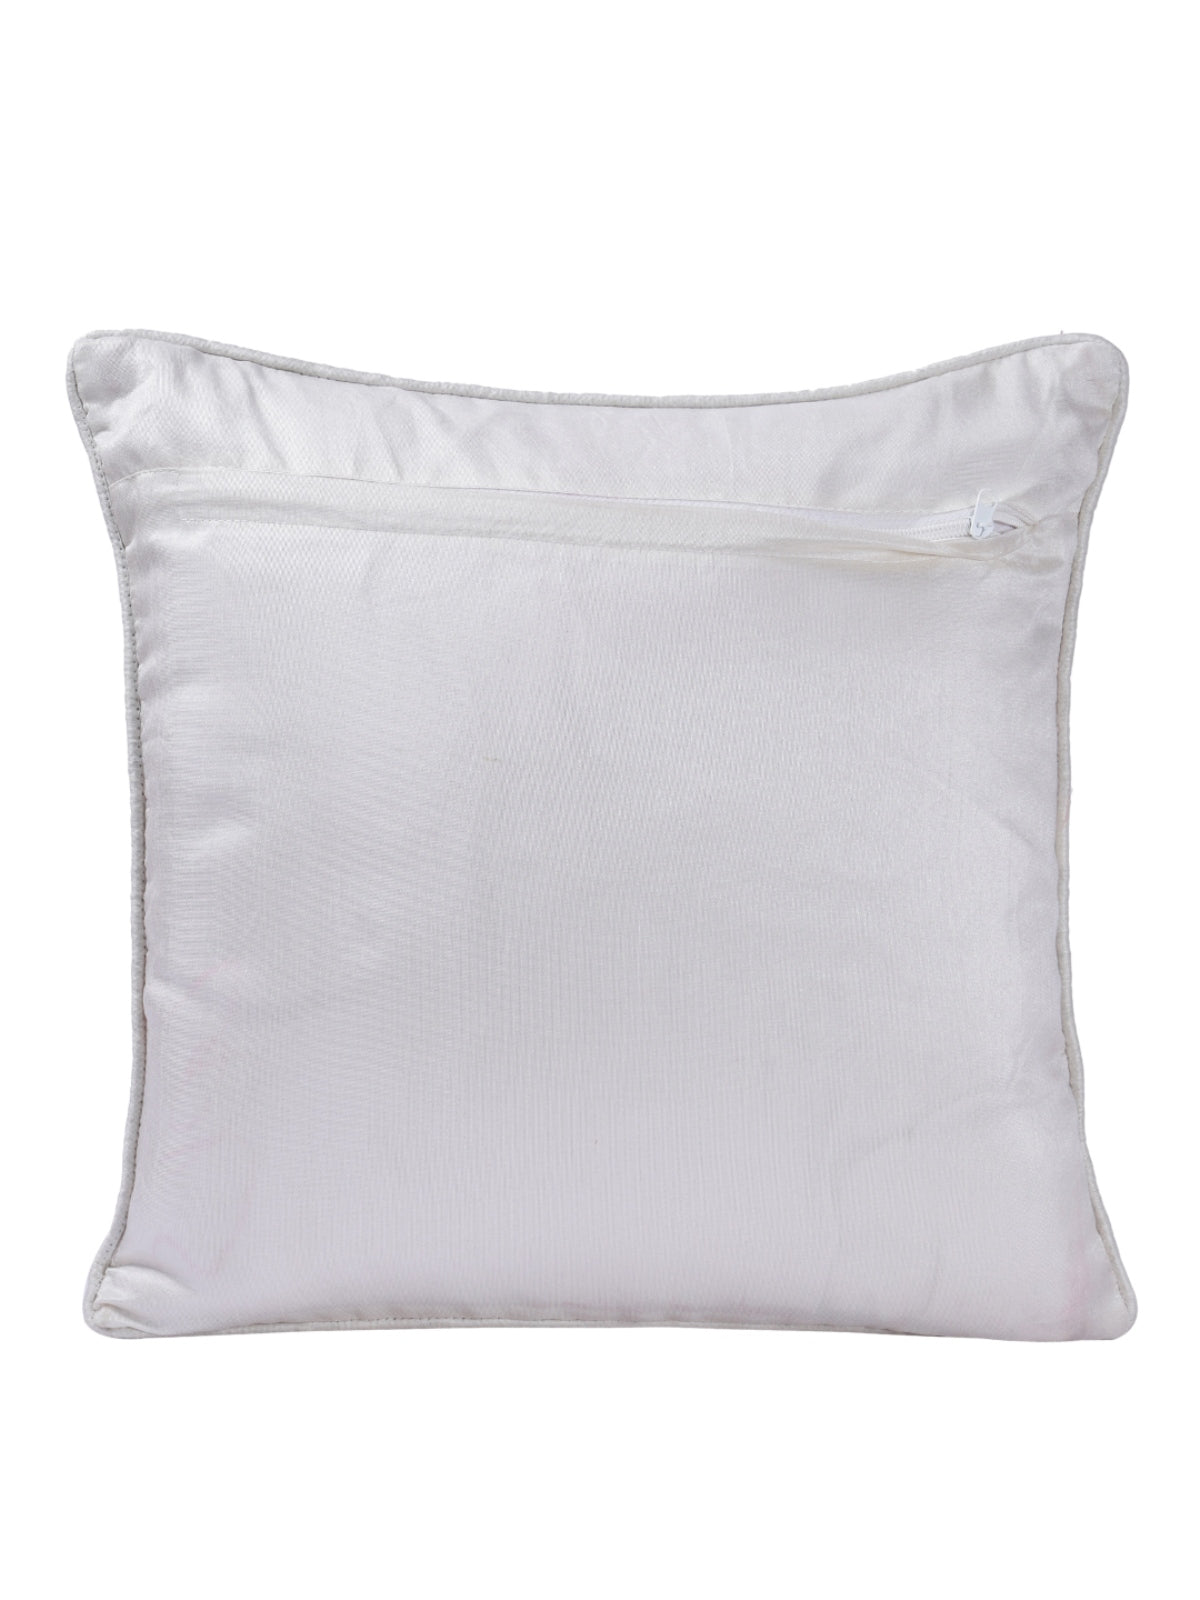 White & Pink Set of 5 Cushion Covers